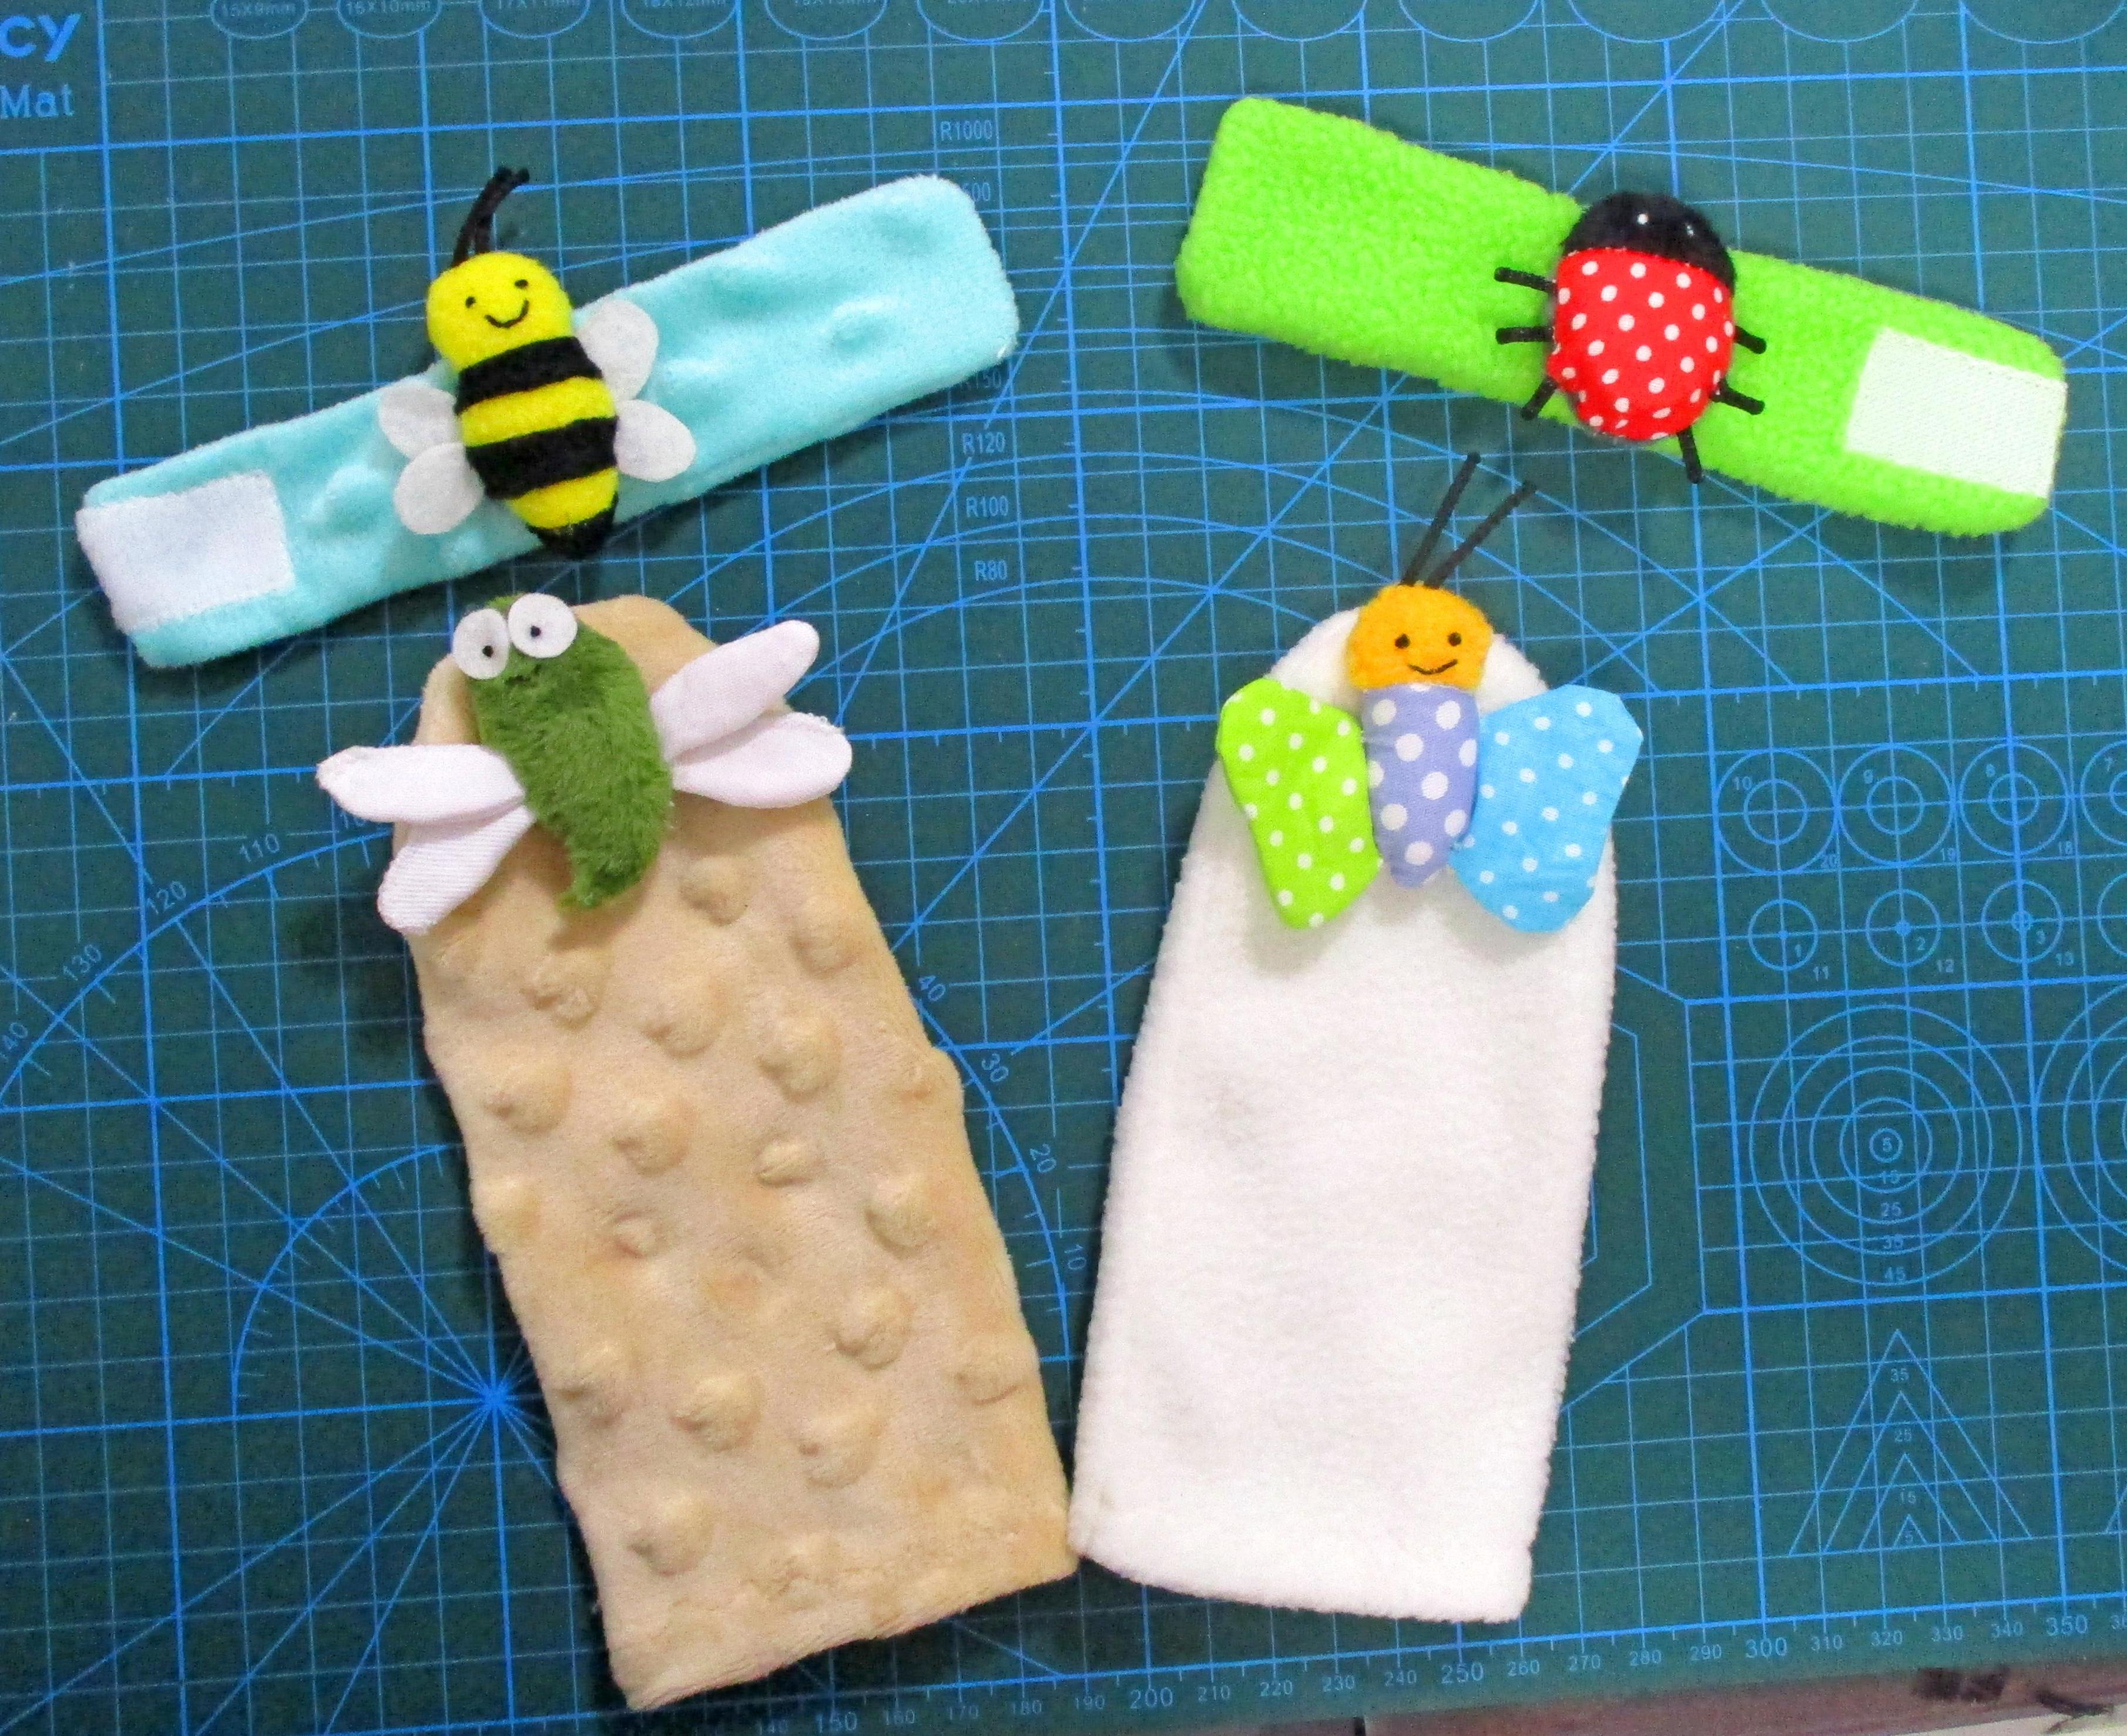 DIY Wrist Rattles and Foot Finder Socks - a Wearable Sensory Toy